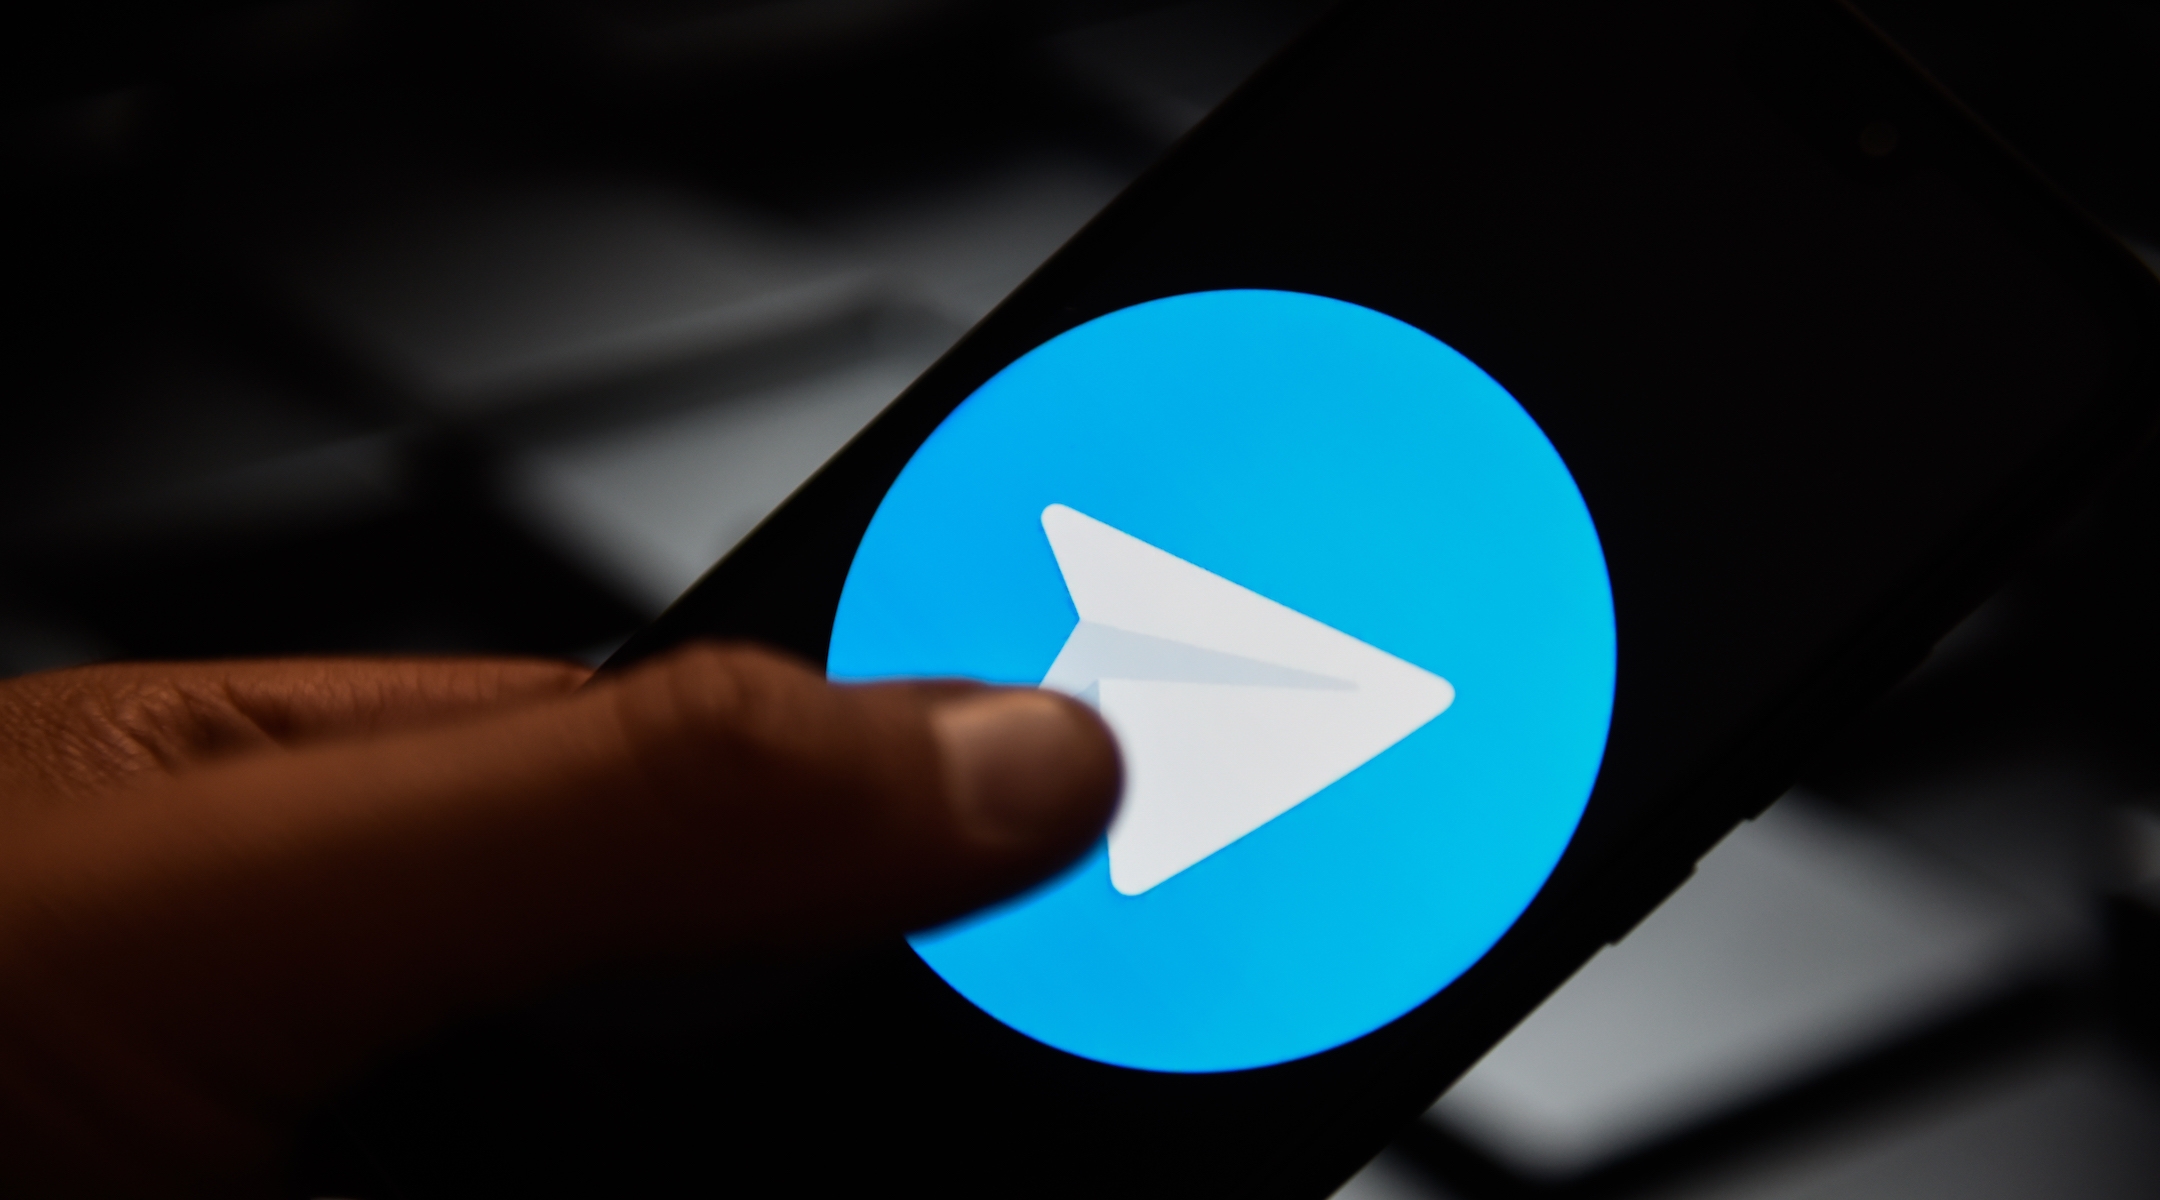 Telegram has hundreds of millions of users. (Omar Marques/SOPA Images/LightRocket via Getty Images)